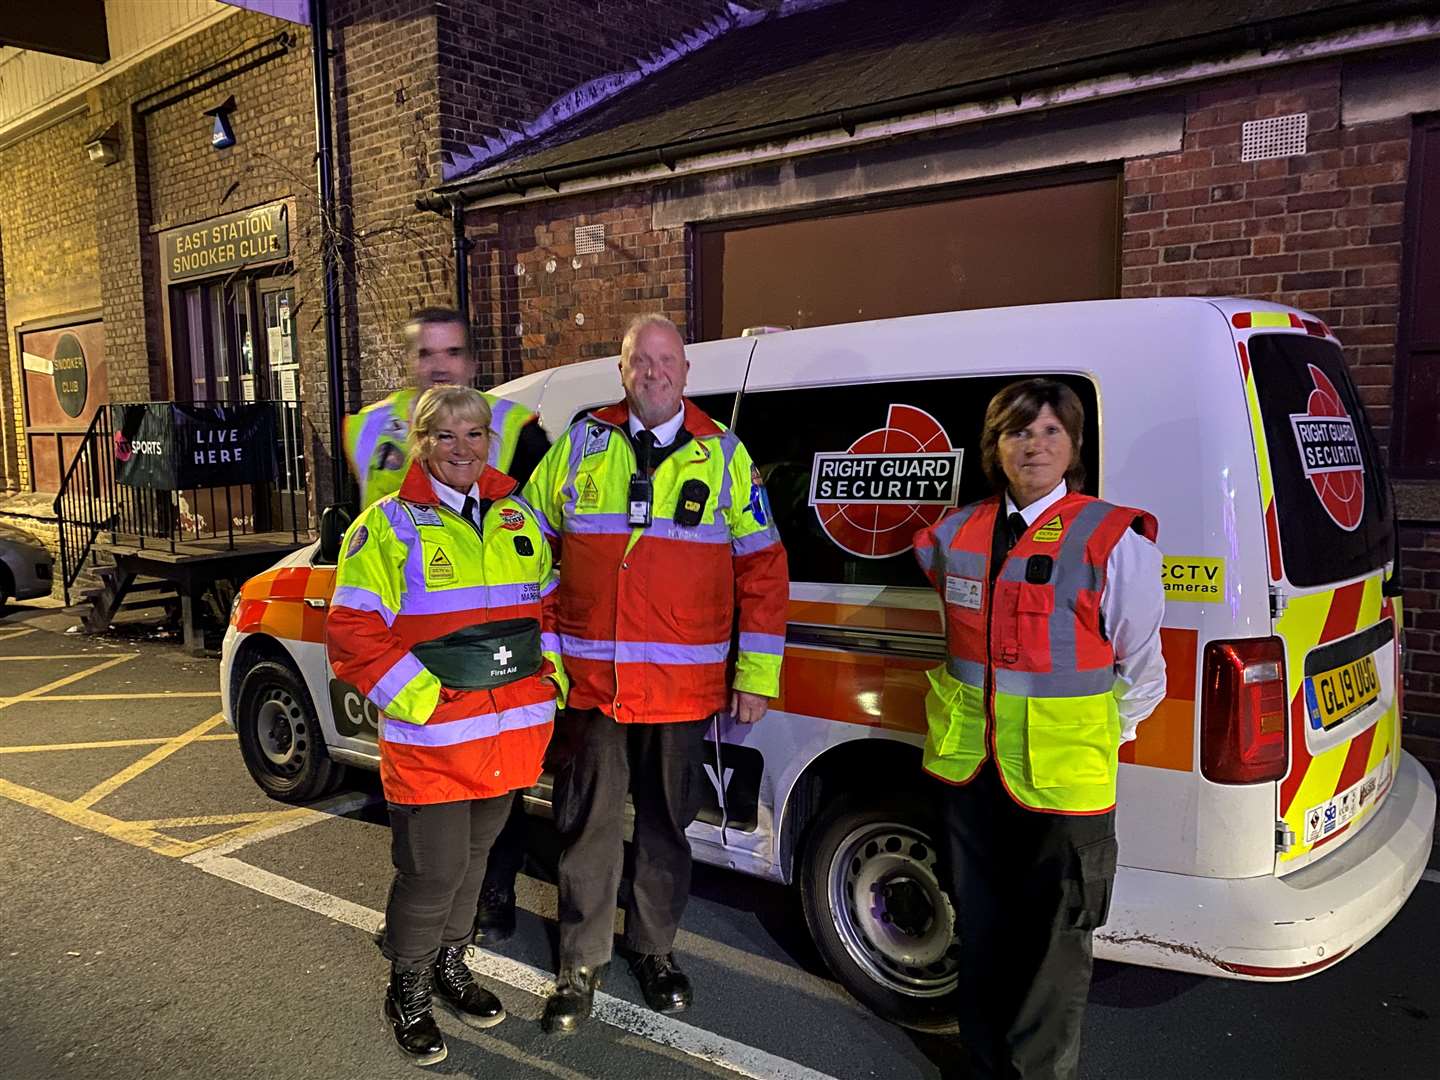 Darren Cook, Liz Harris, David Turner, Caroline Turner are Right Guard security officers who work as street marshals for universities in Canterbury